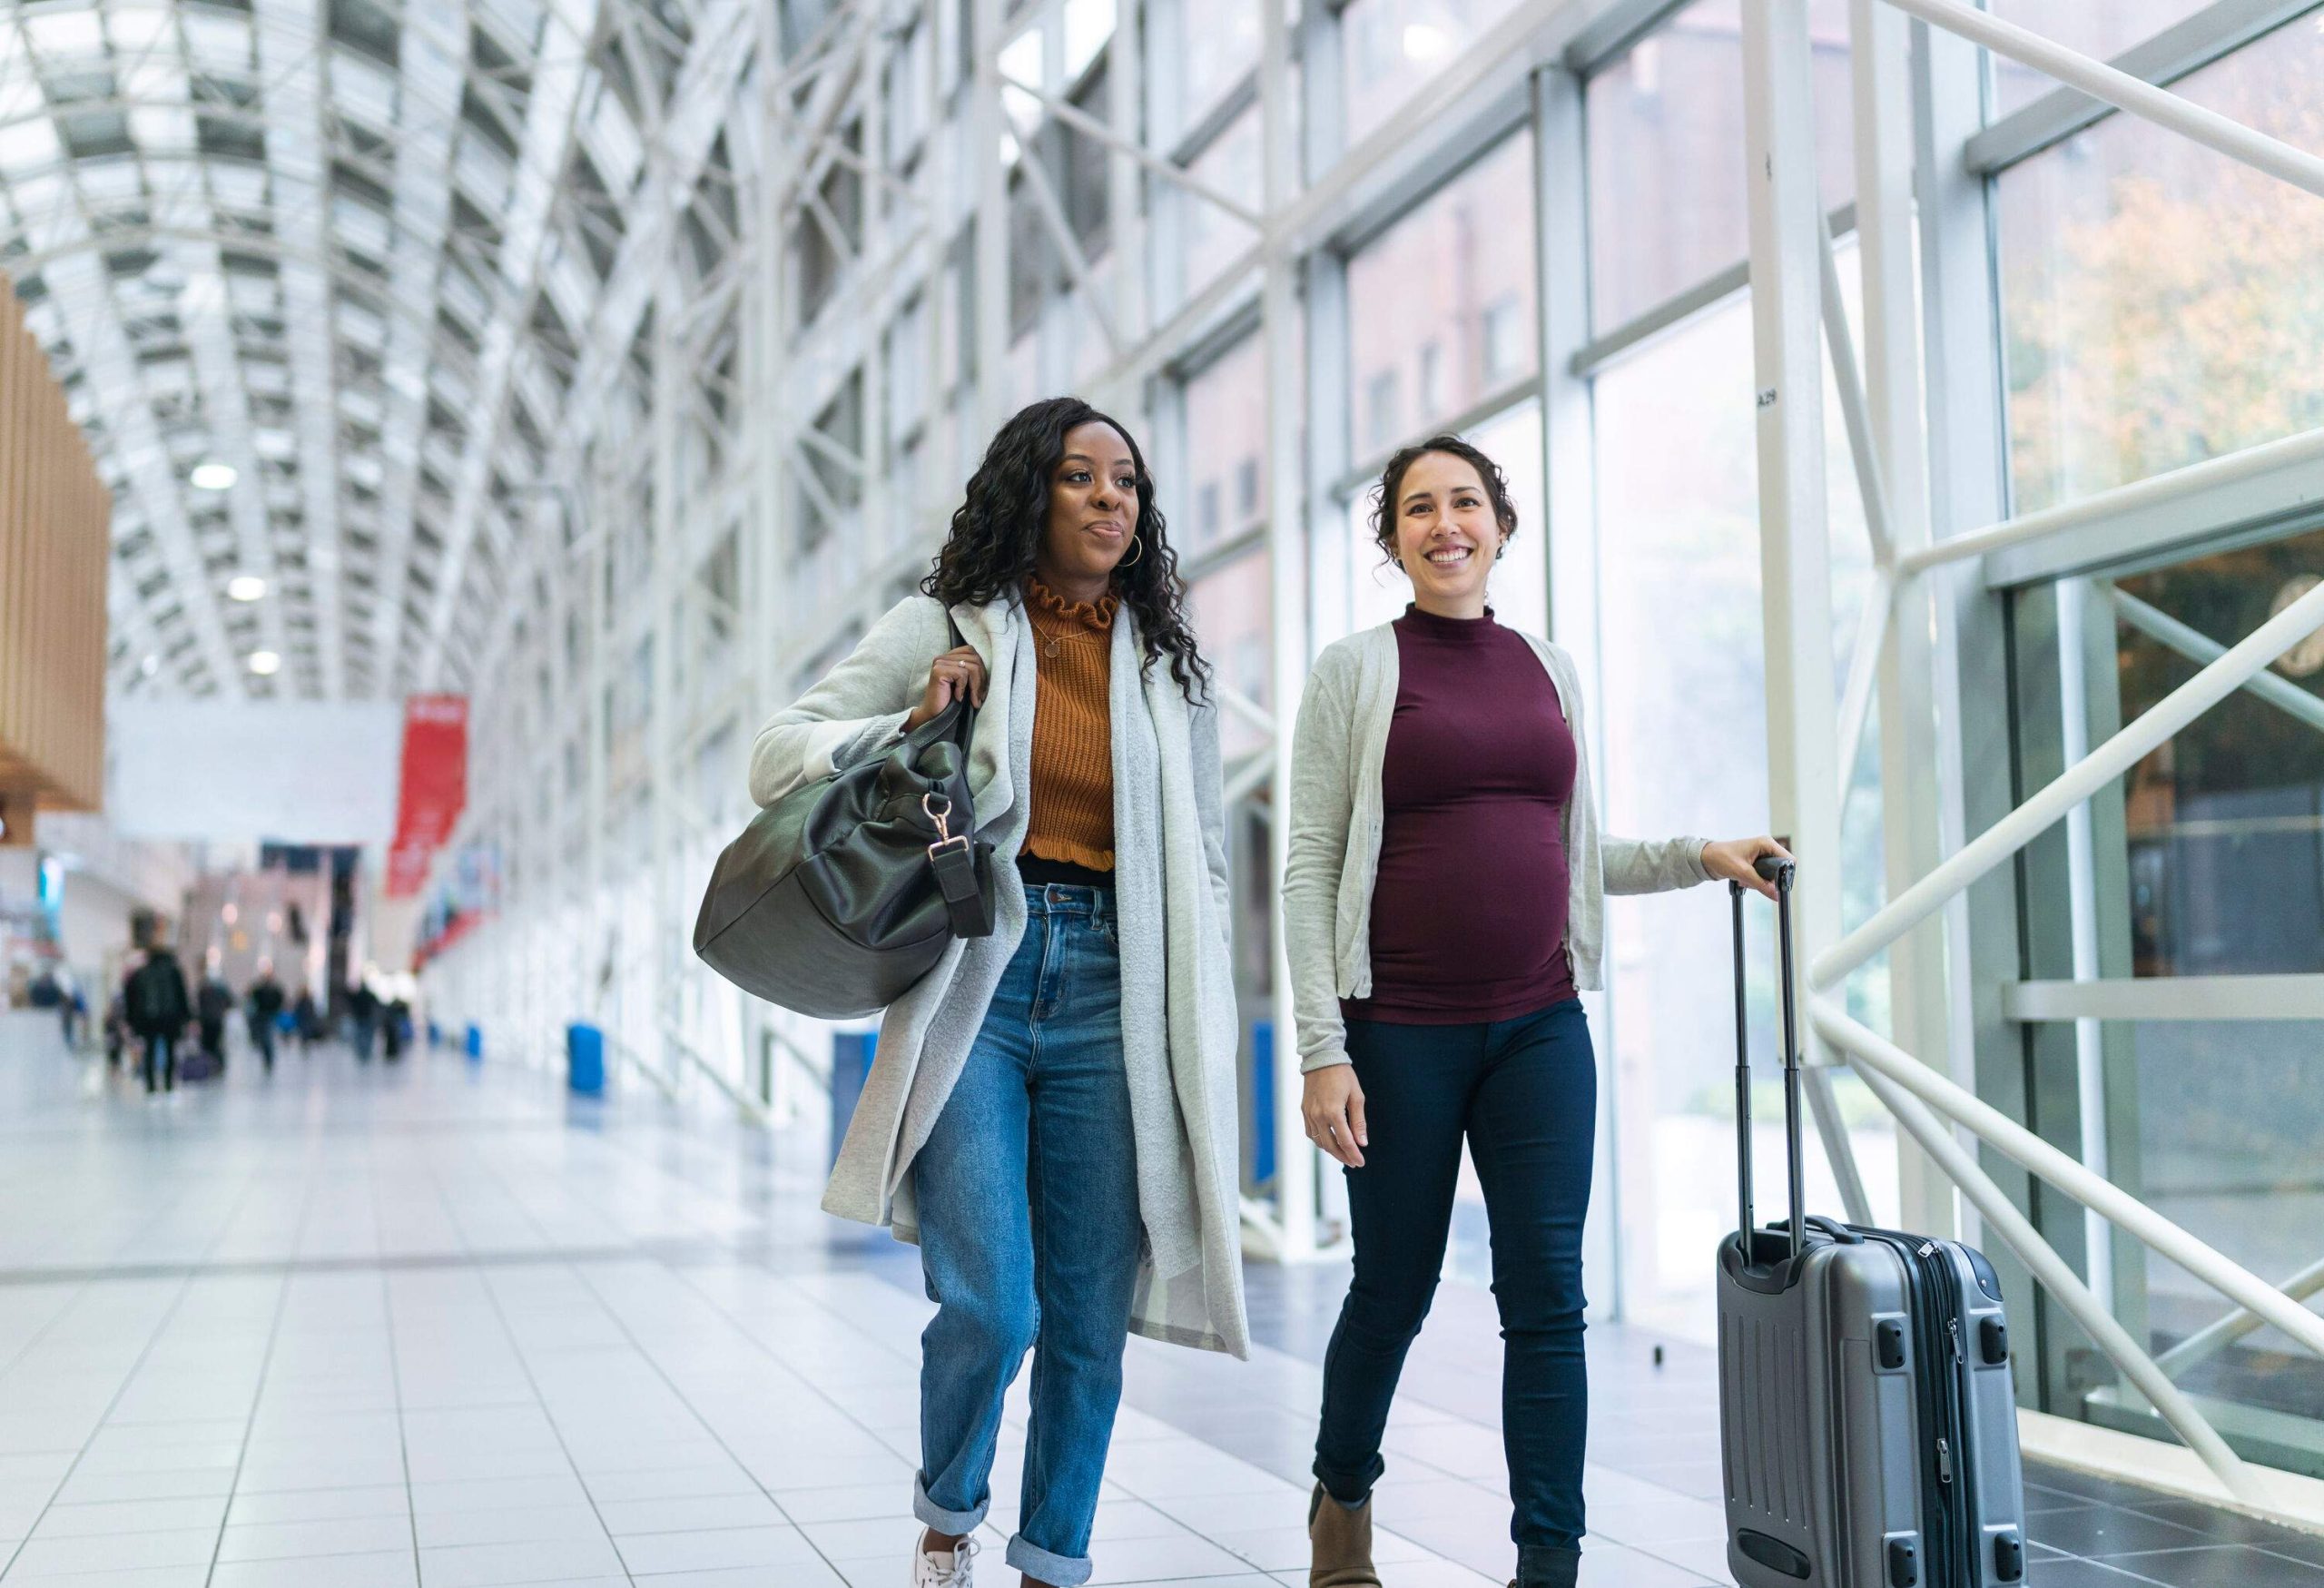 Two female friends with bright smiles were walking side by side through the airport, each carrying their luggage.